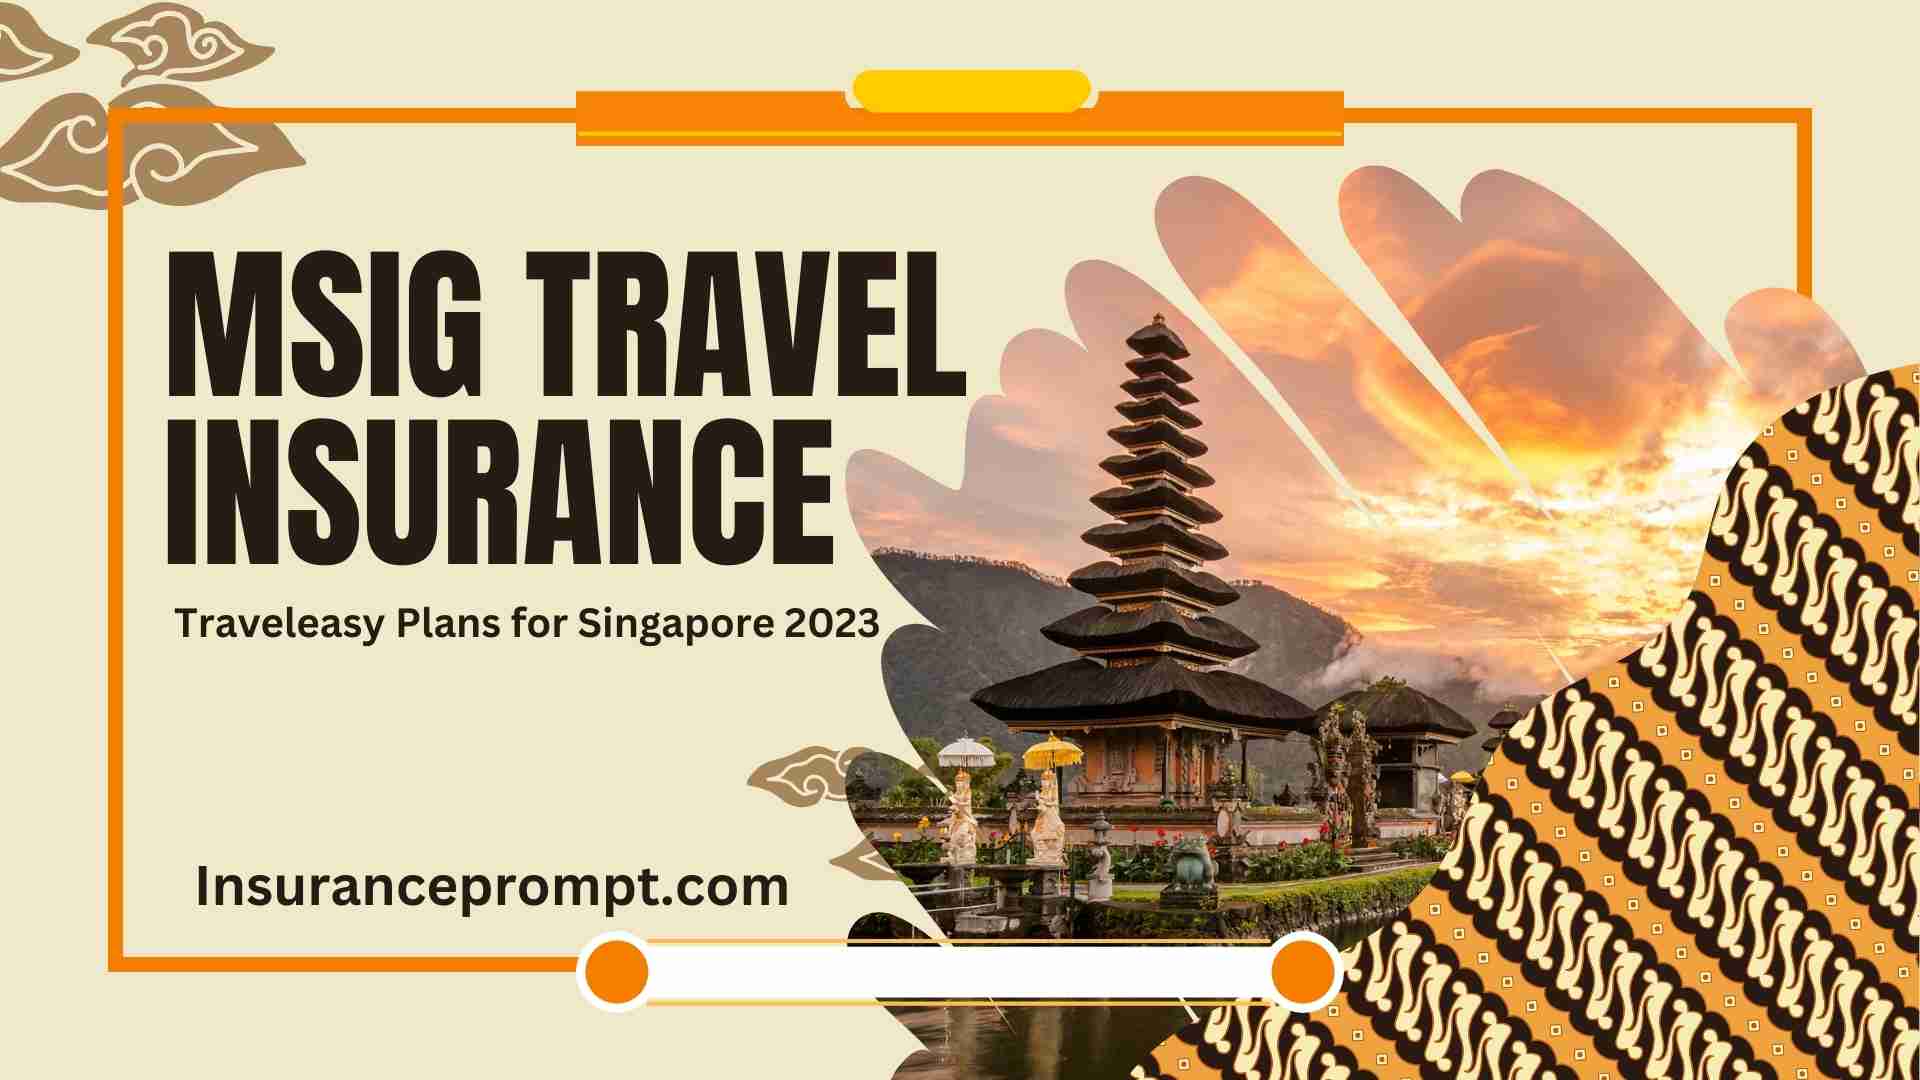 MSIG Travel Insurance: Traveleasy Plans for Singapore 2023